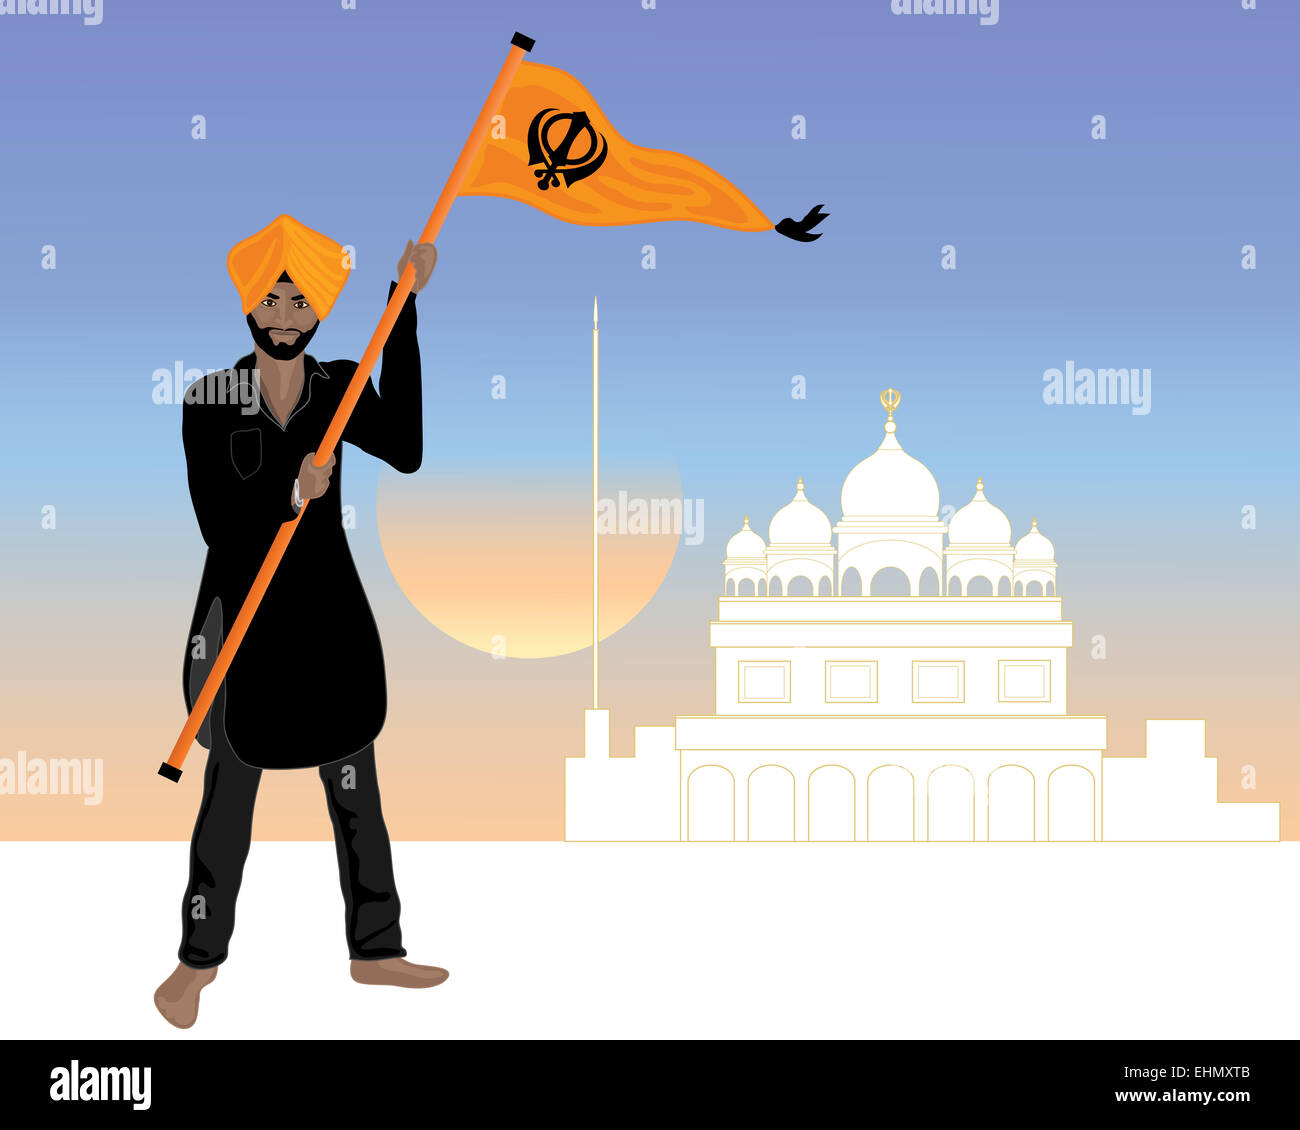 an illustration of a proud Sikh man dressed in a black salwar kameez with the Sikh flag nishan sahib Stock Photo